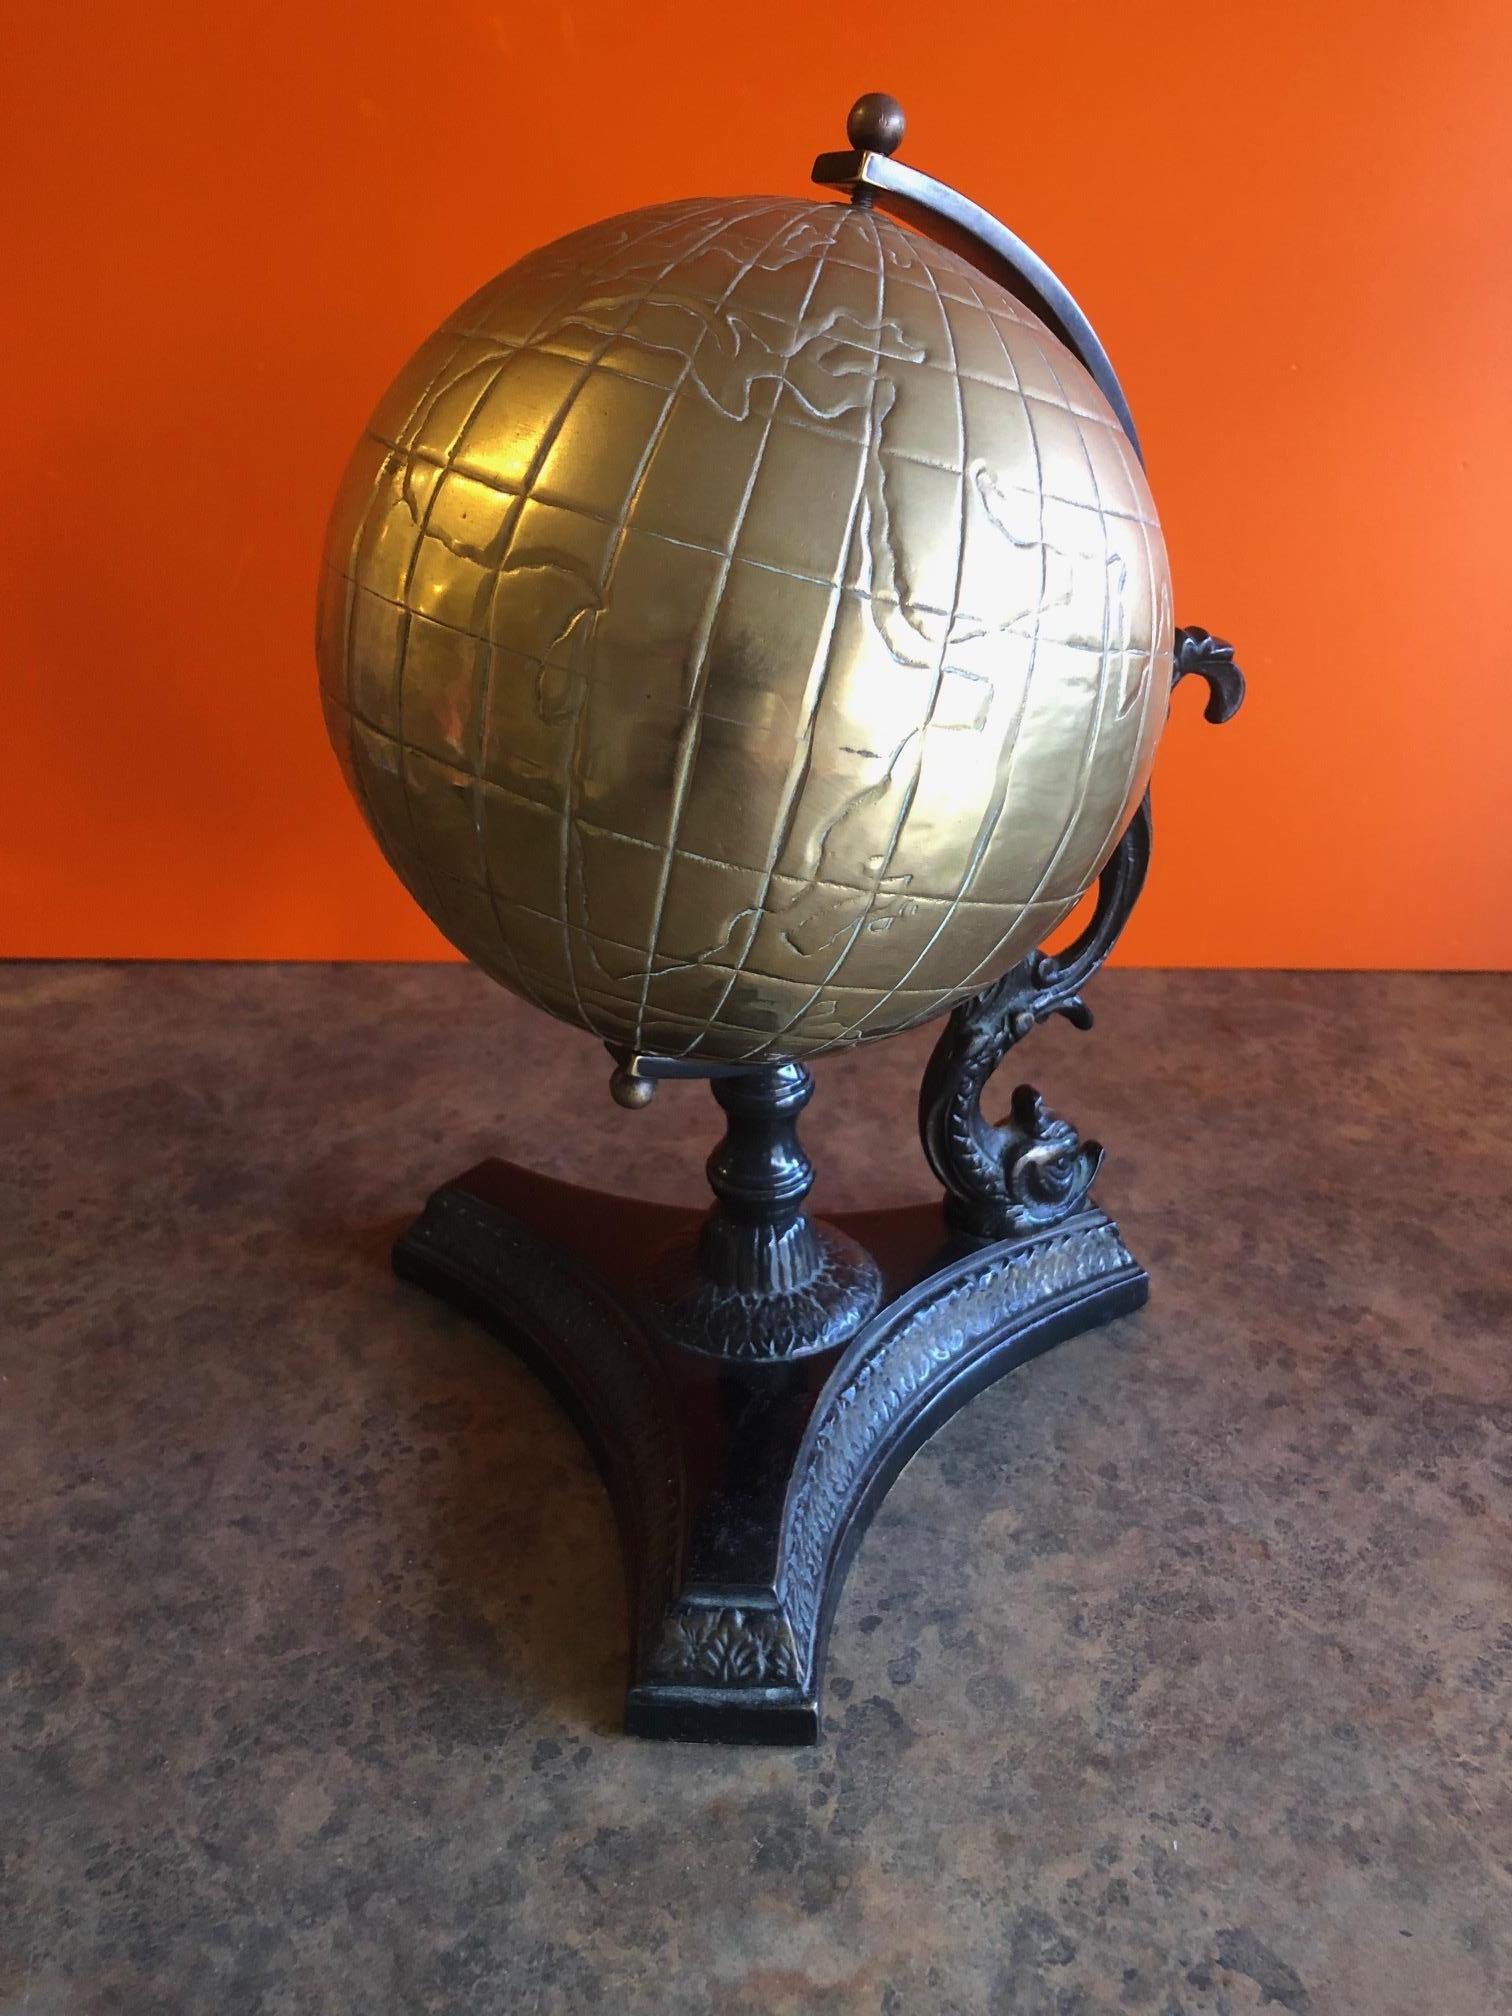 Unique old world brass desk globe, circa 2000s. Made of solid brass for long lasting visual appeal, this eye-catching golden globe is set atop of a dark platform with a dragon support.

Dimensions: 11 inches high x 9 inches wide x 8 inches deep.